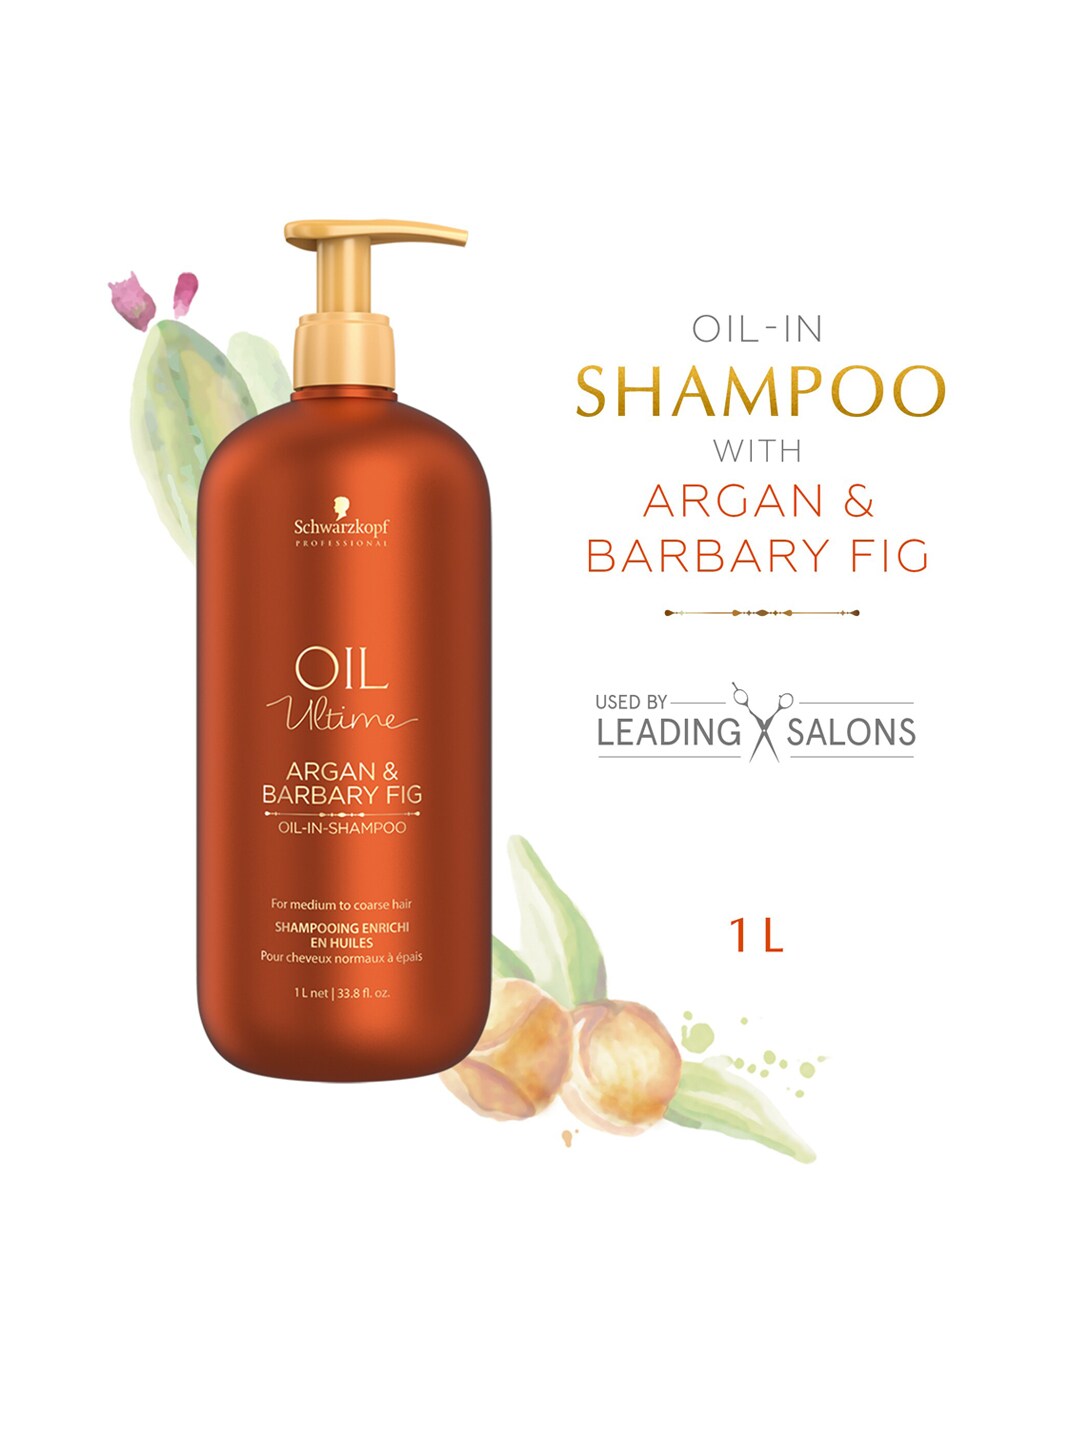 Schwarzkopf PROFESSIONAL Oil Ultime - Argan & Barbary Fig Oil-In Shampoo Price in India